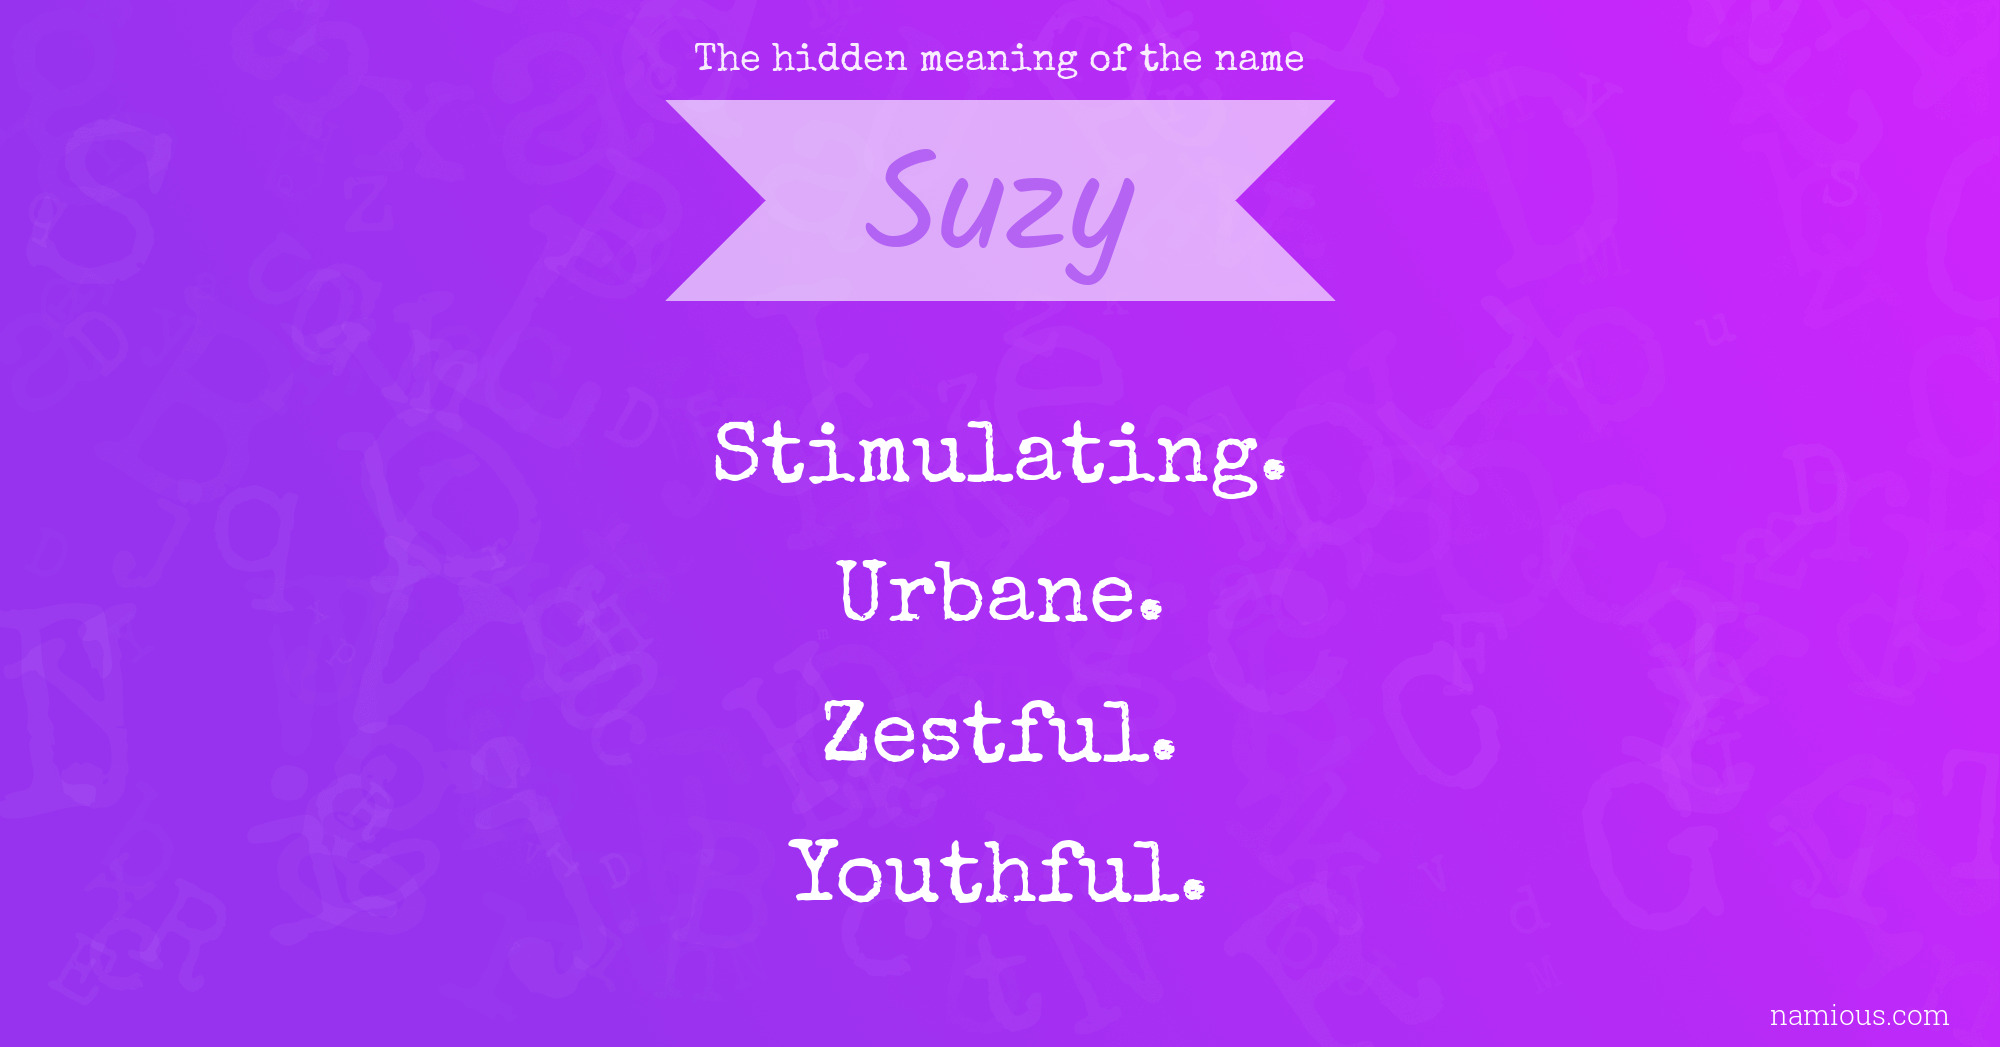 The hidden meaning of the name Suzy